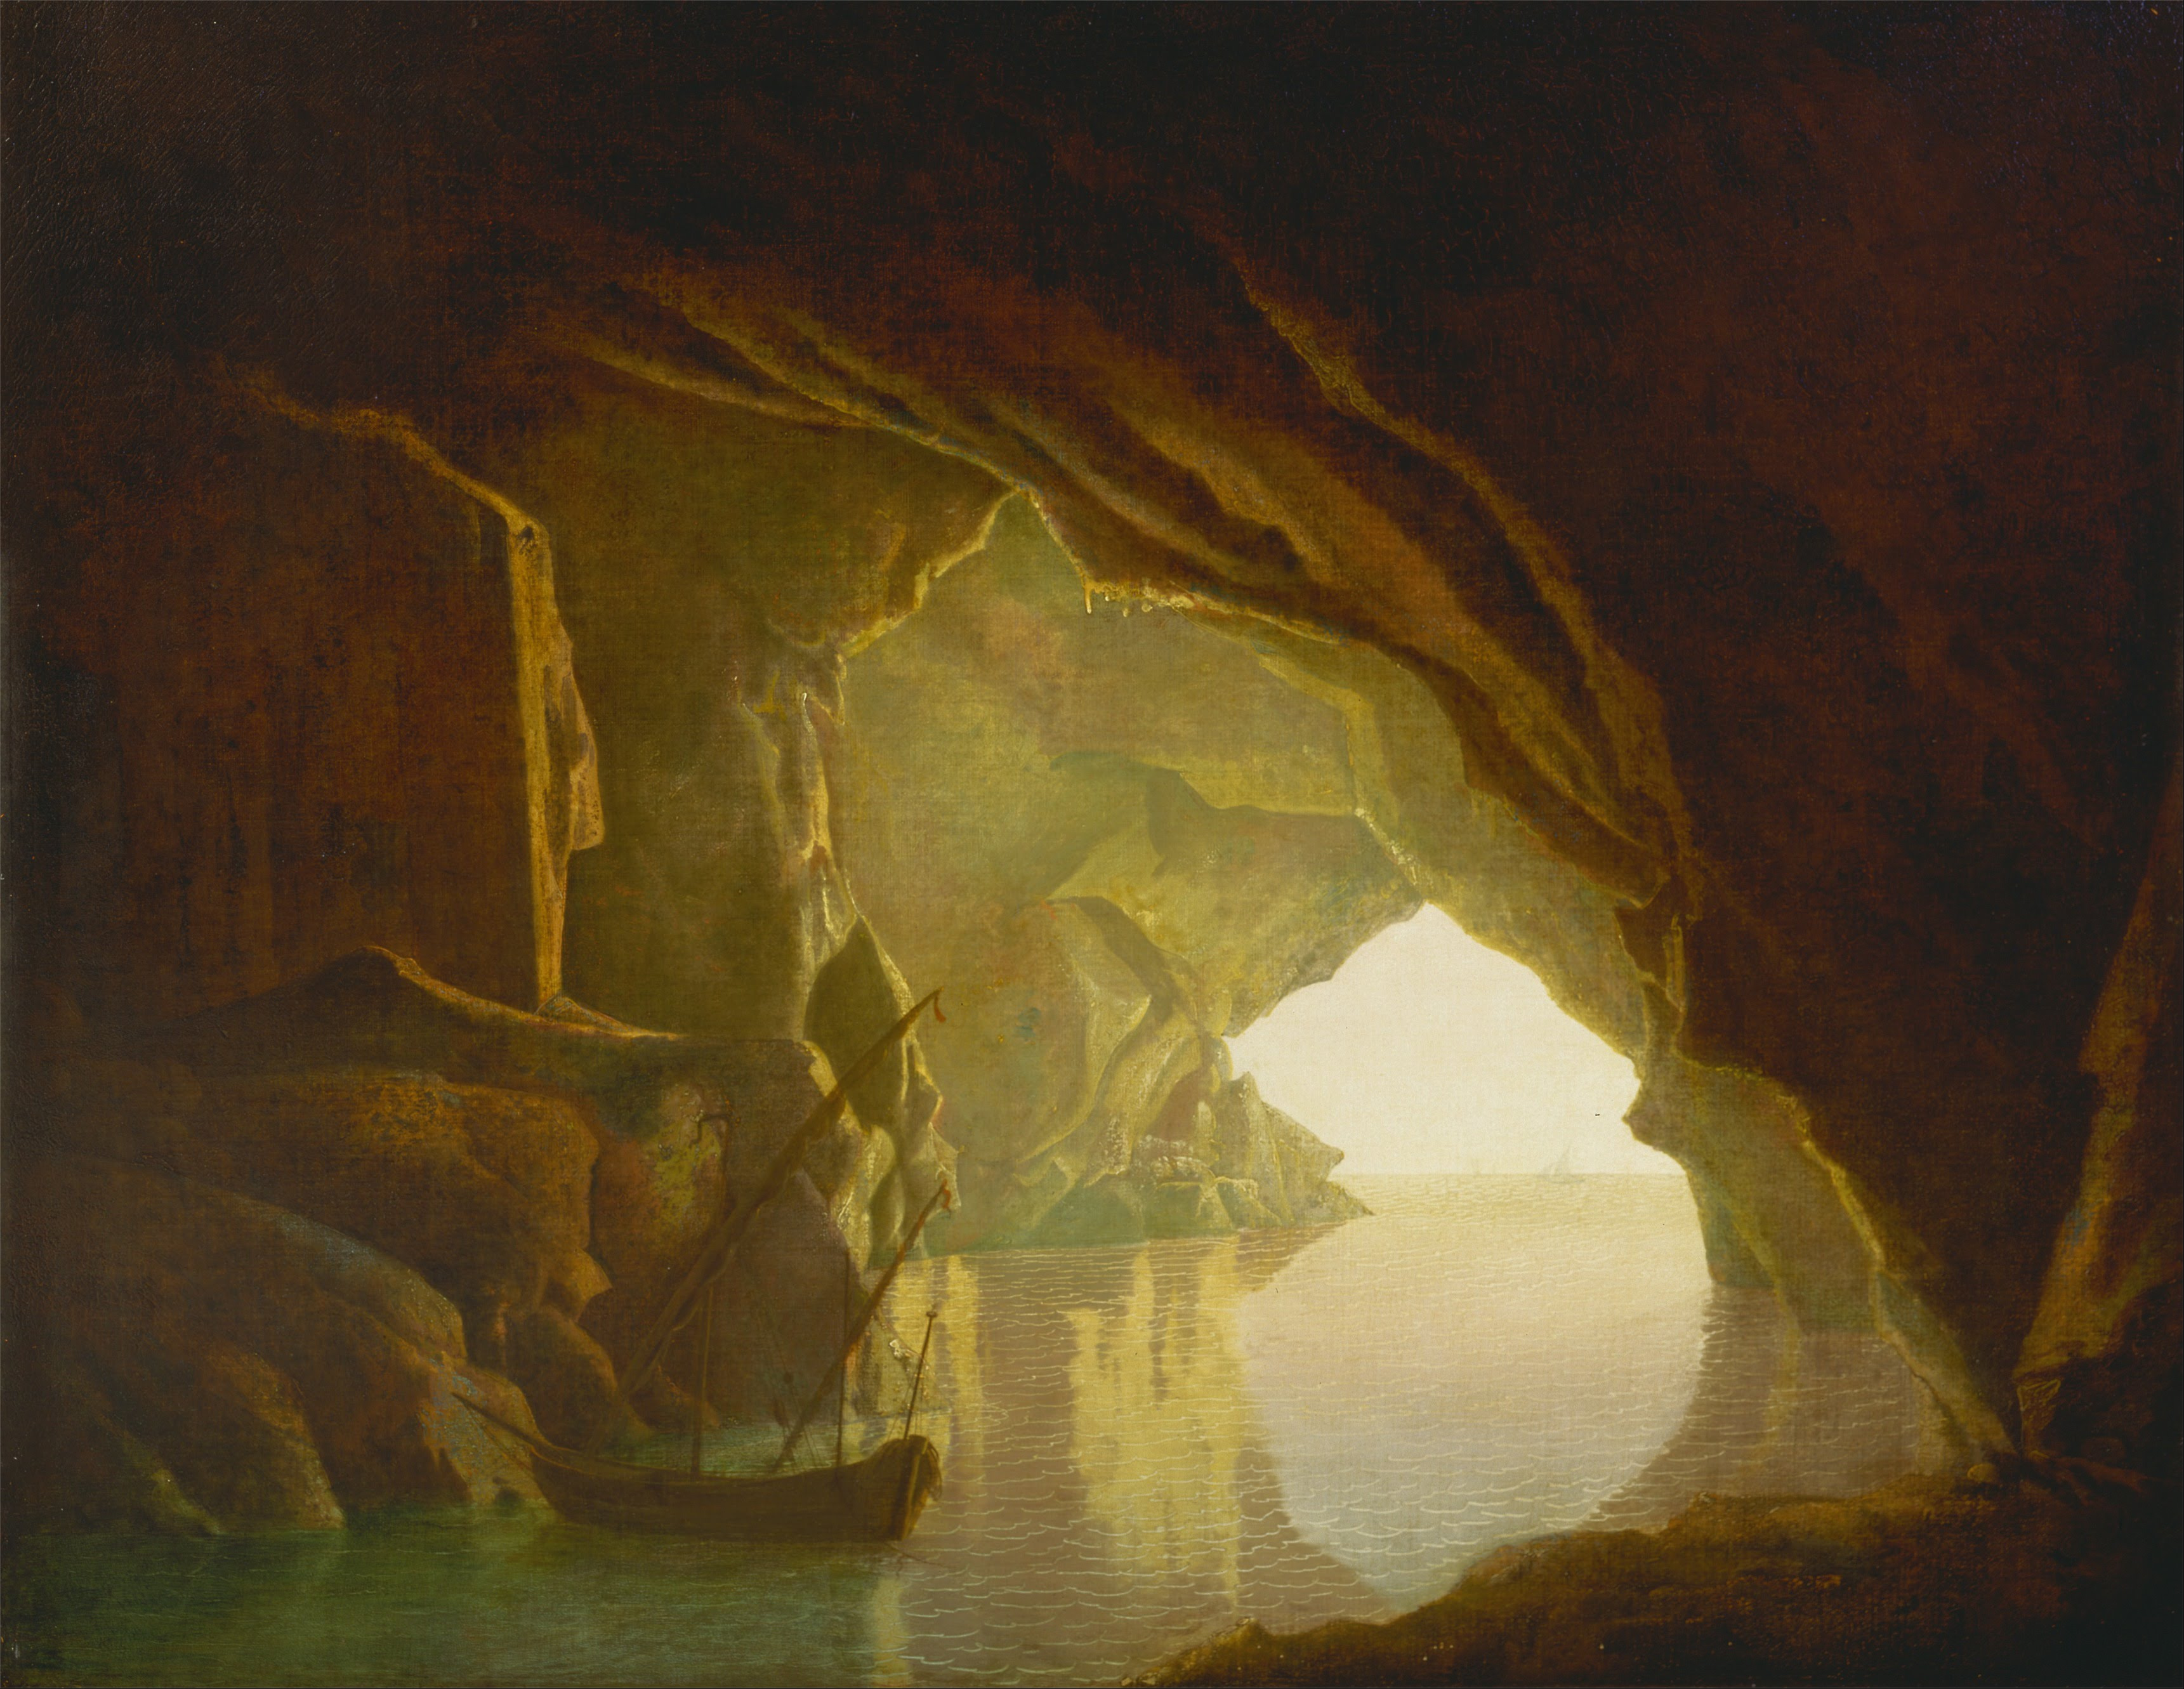 Joseph Wright of Derby - A Grotto in the Gulf of Salerno, Sunset - Google Art Project